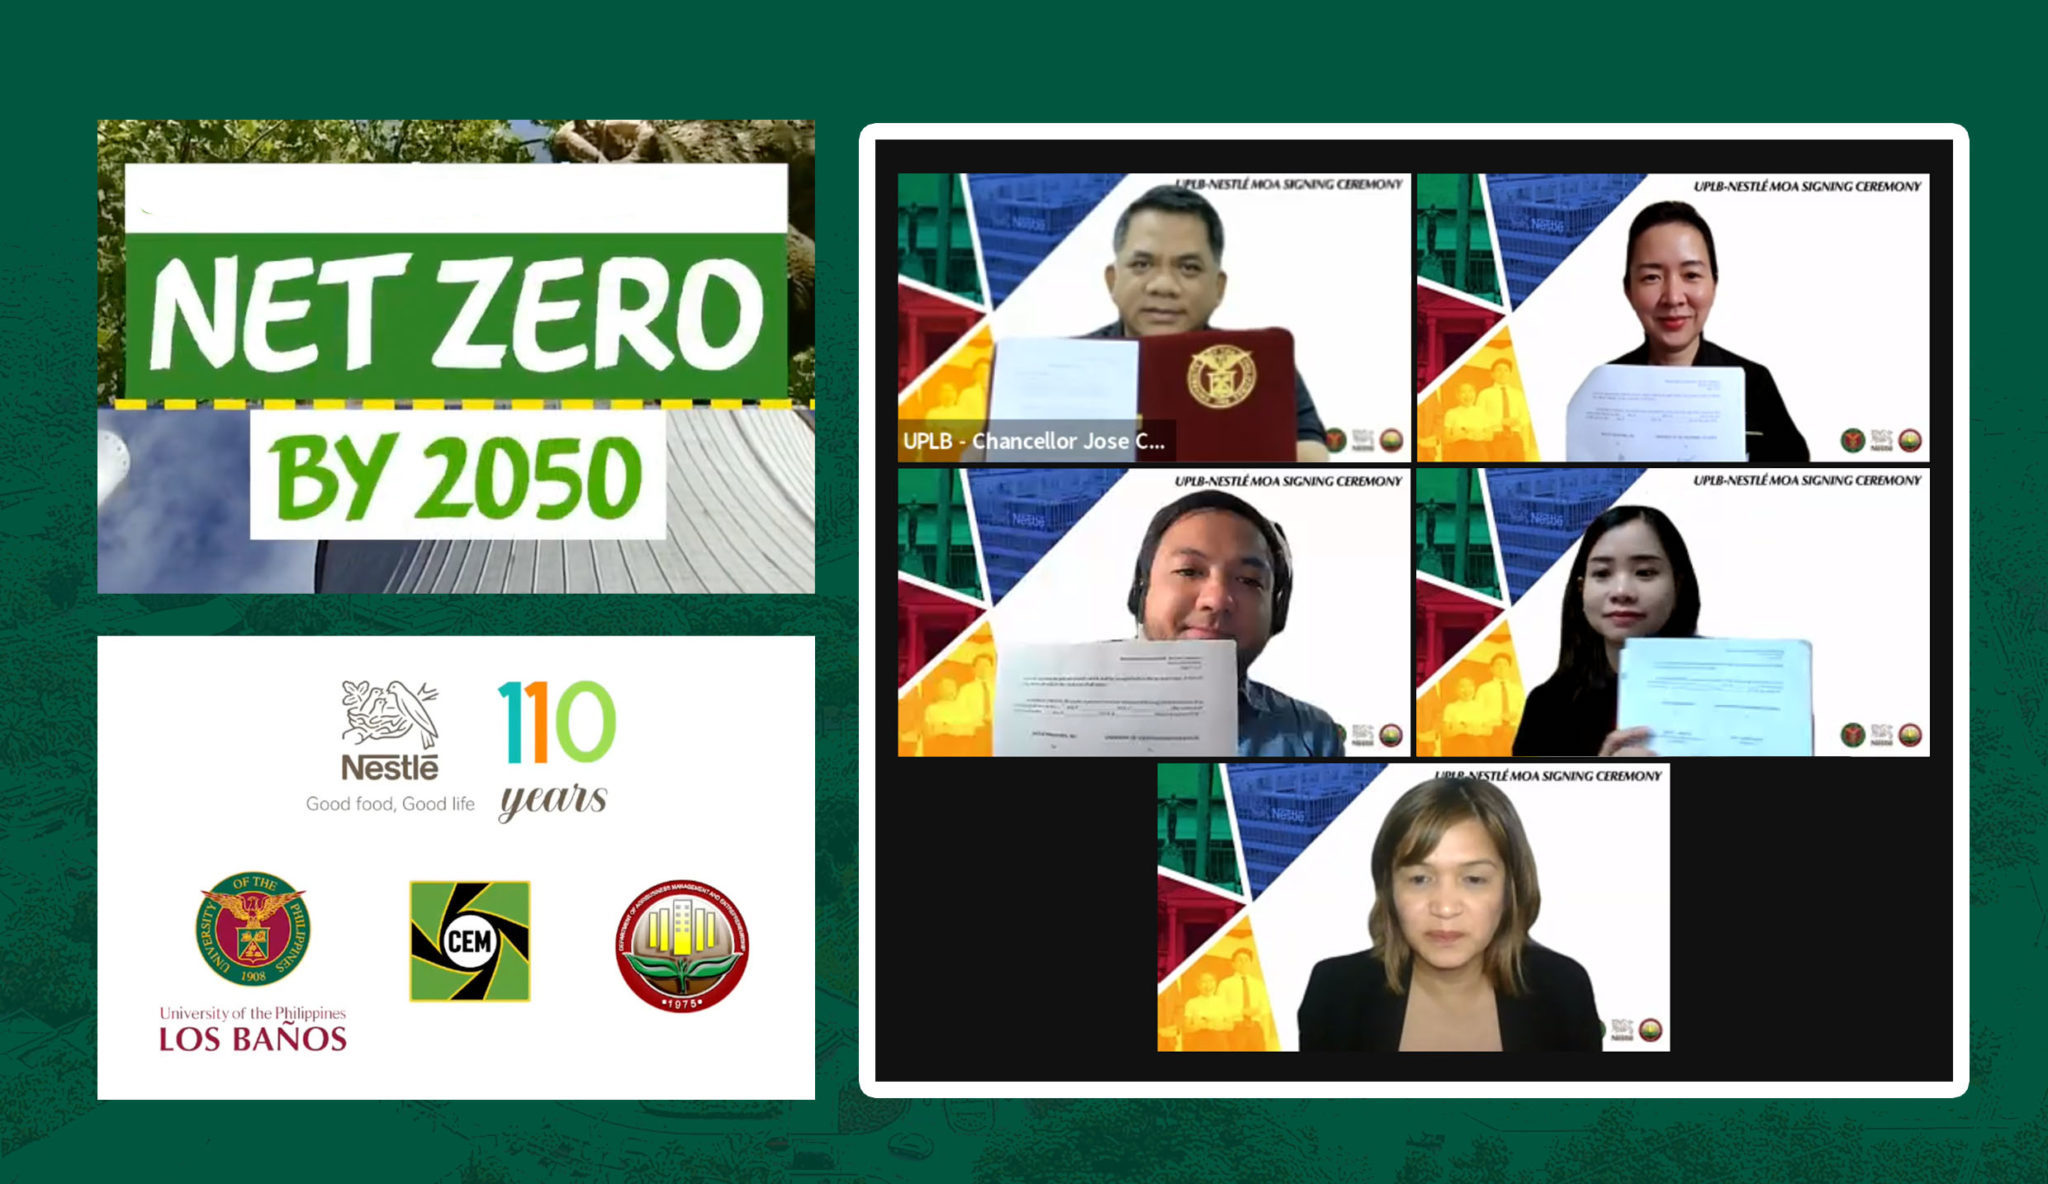 A Net Zero IdeaNation: UPLB and Nestlé PH partner to generate sustainable solutions from the youth